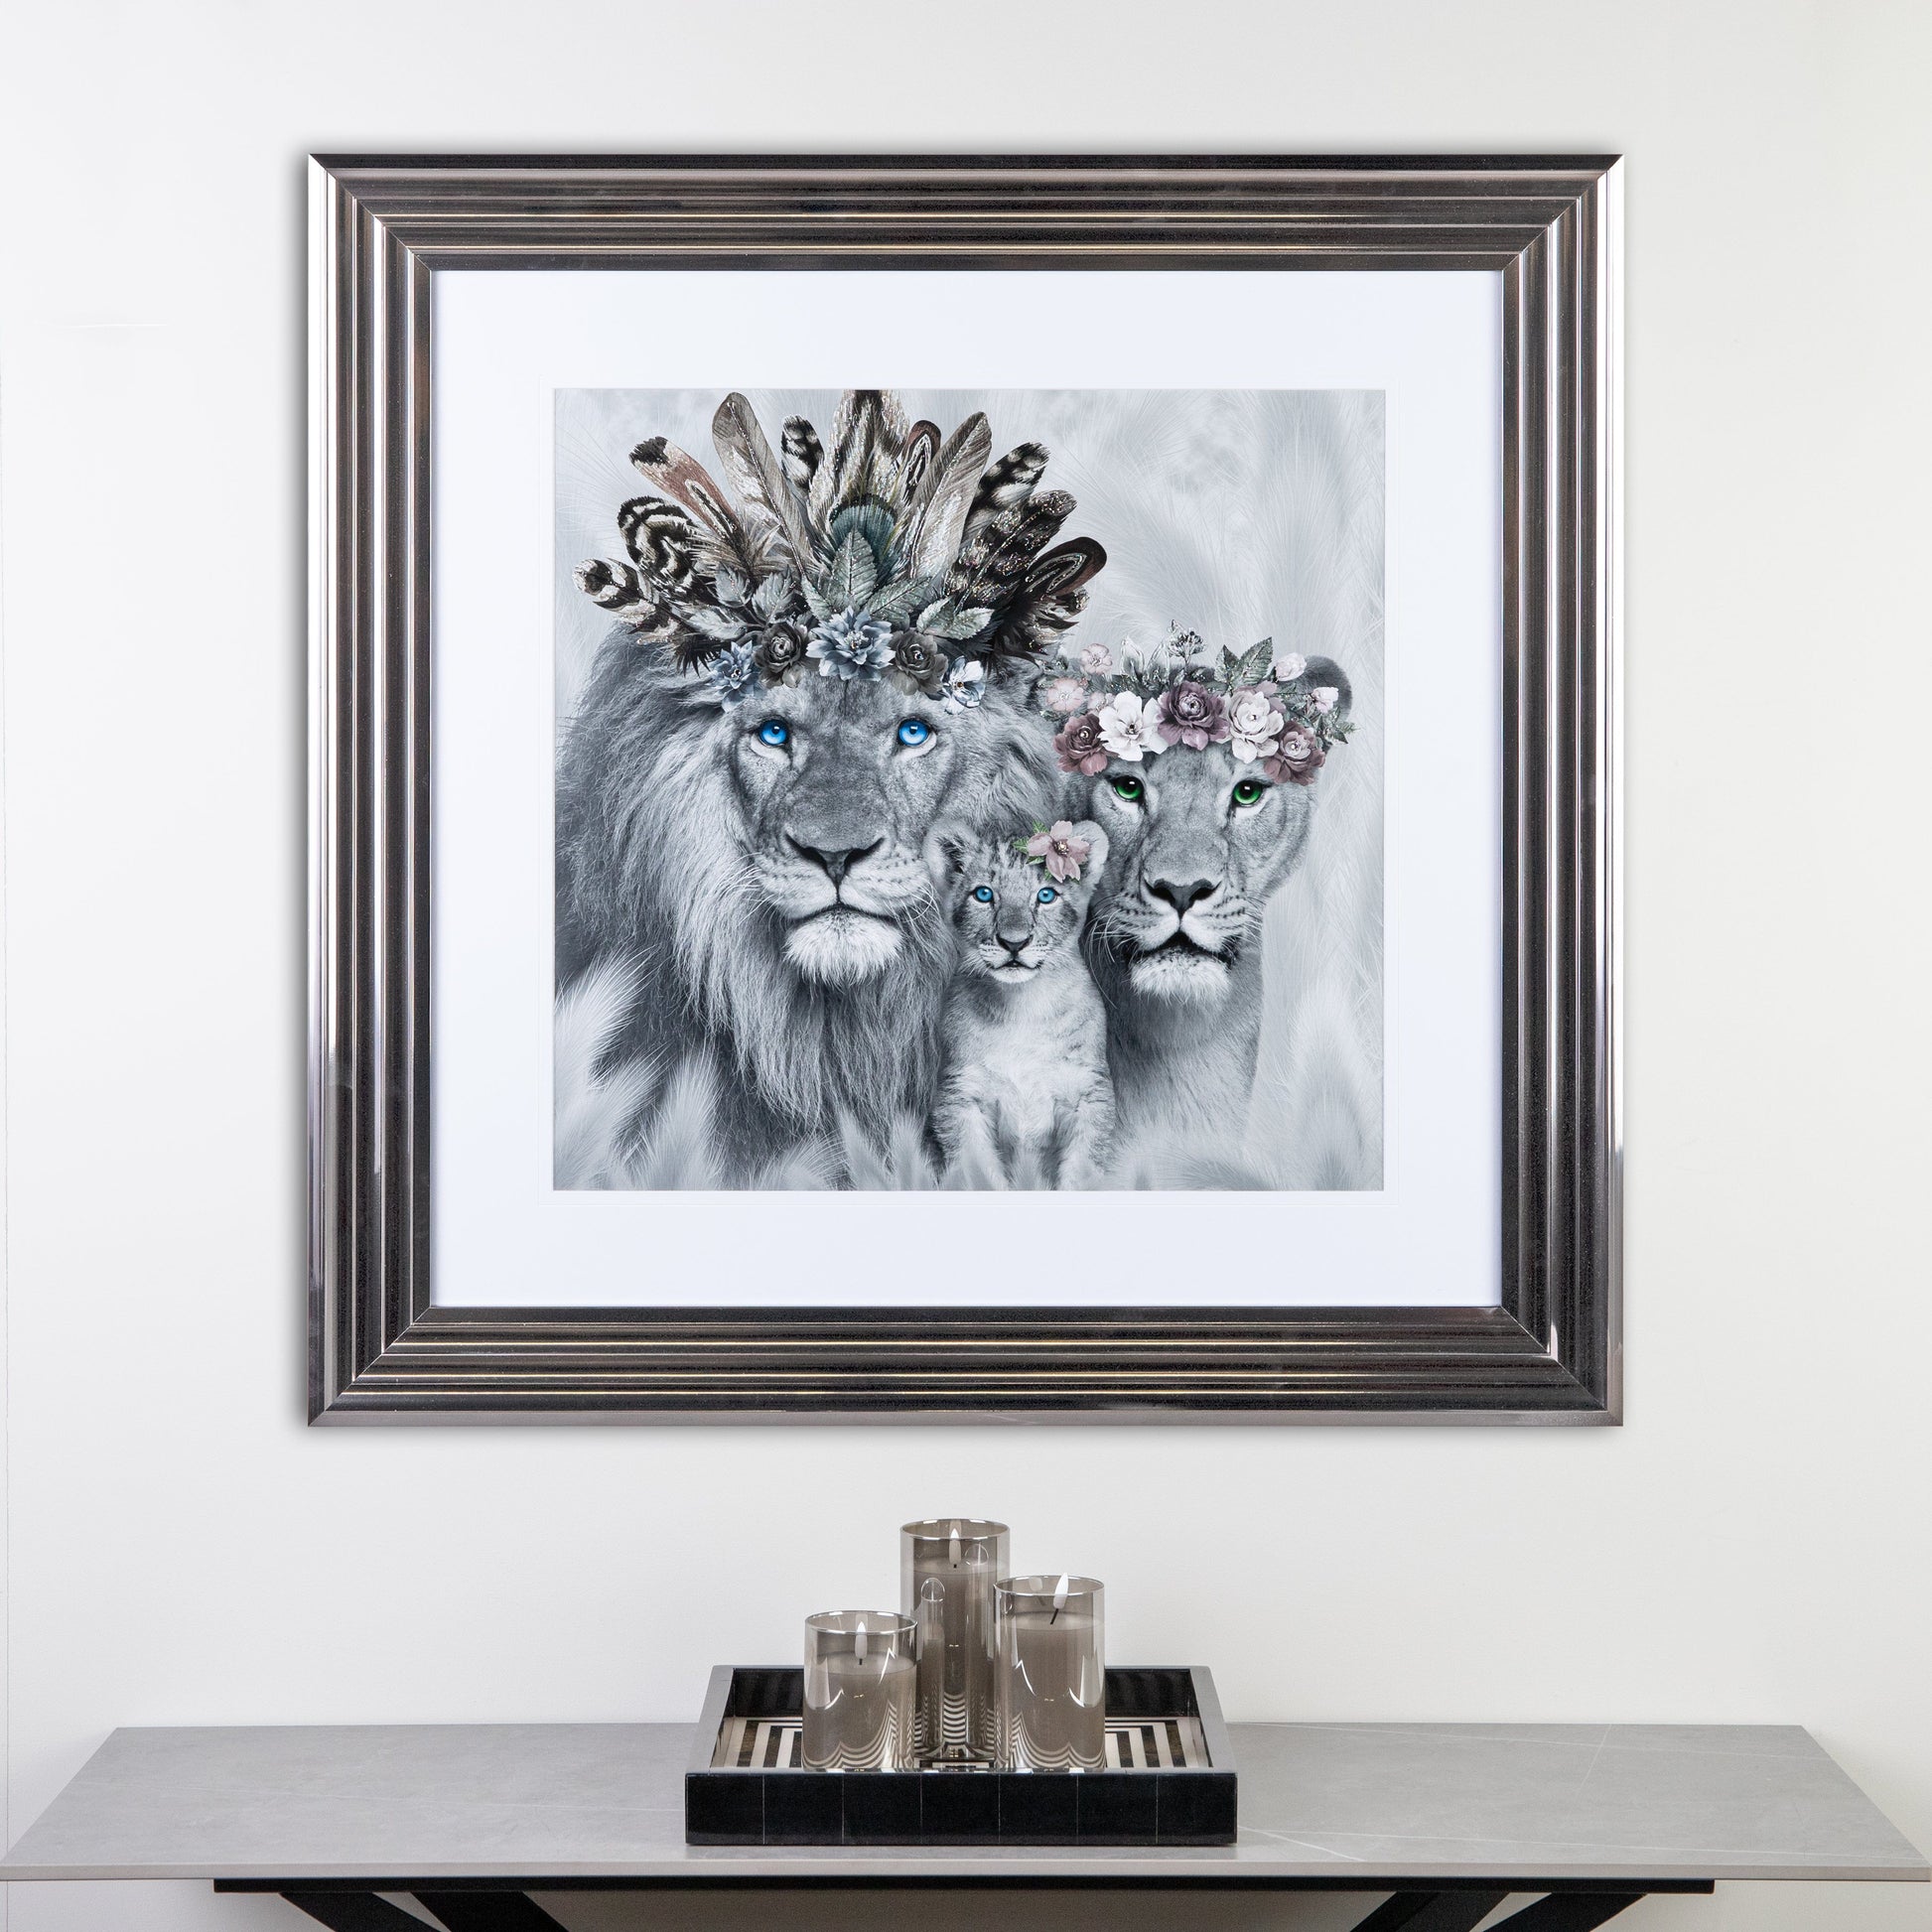 Pictures  -  Shh One Cub Lion Family Framed Picture 90 X 90  -  60003234